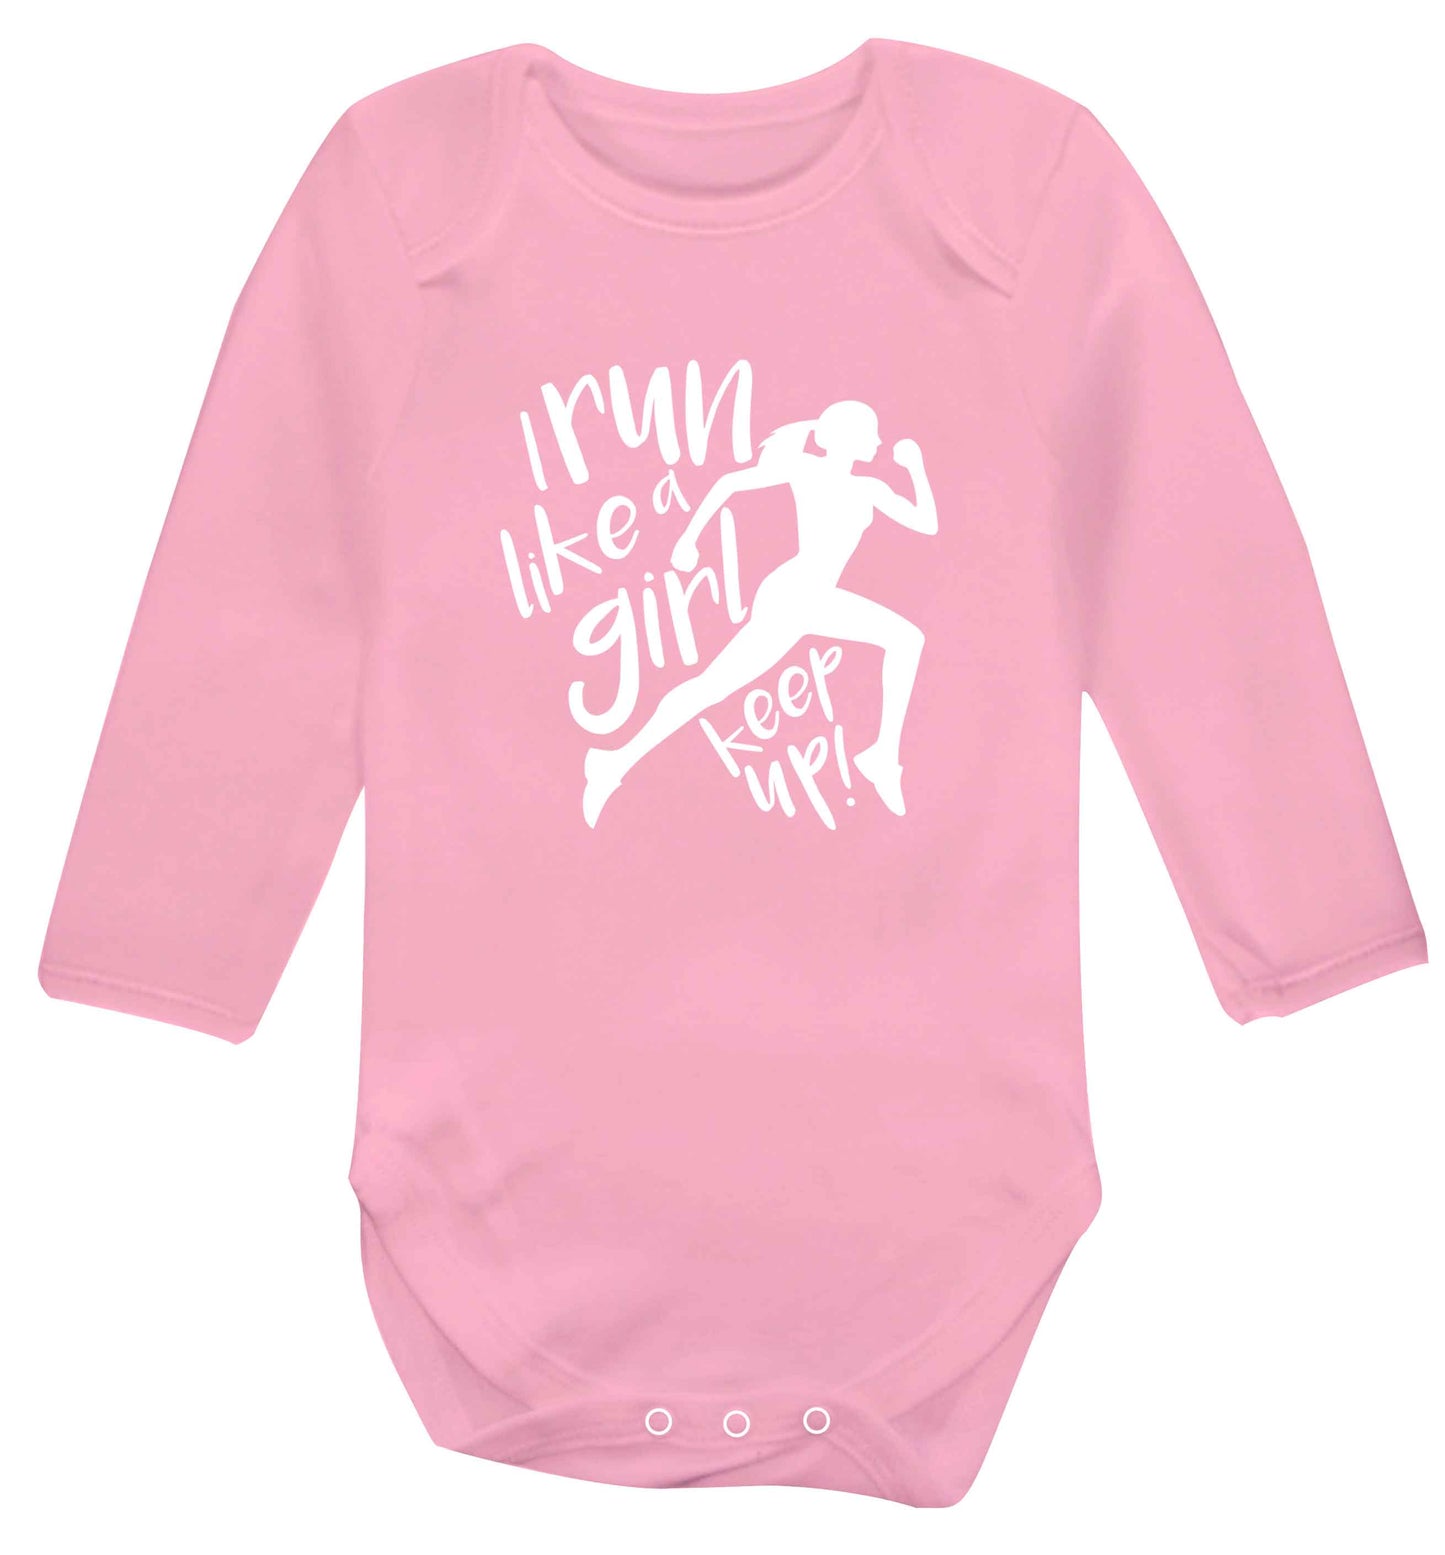 I run like a girl, keep up! baby vest long sleeved pale pink 6-12 months